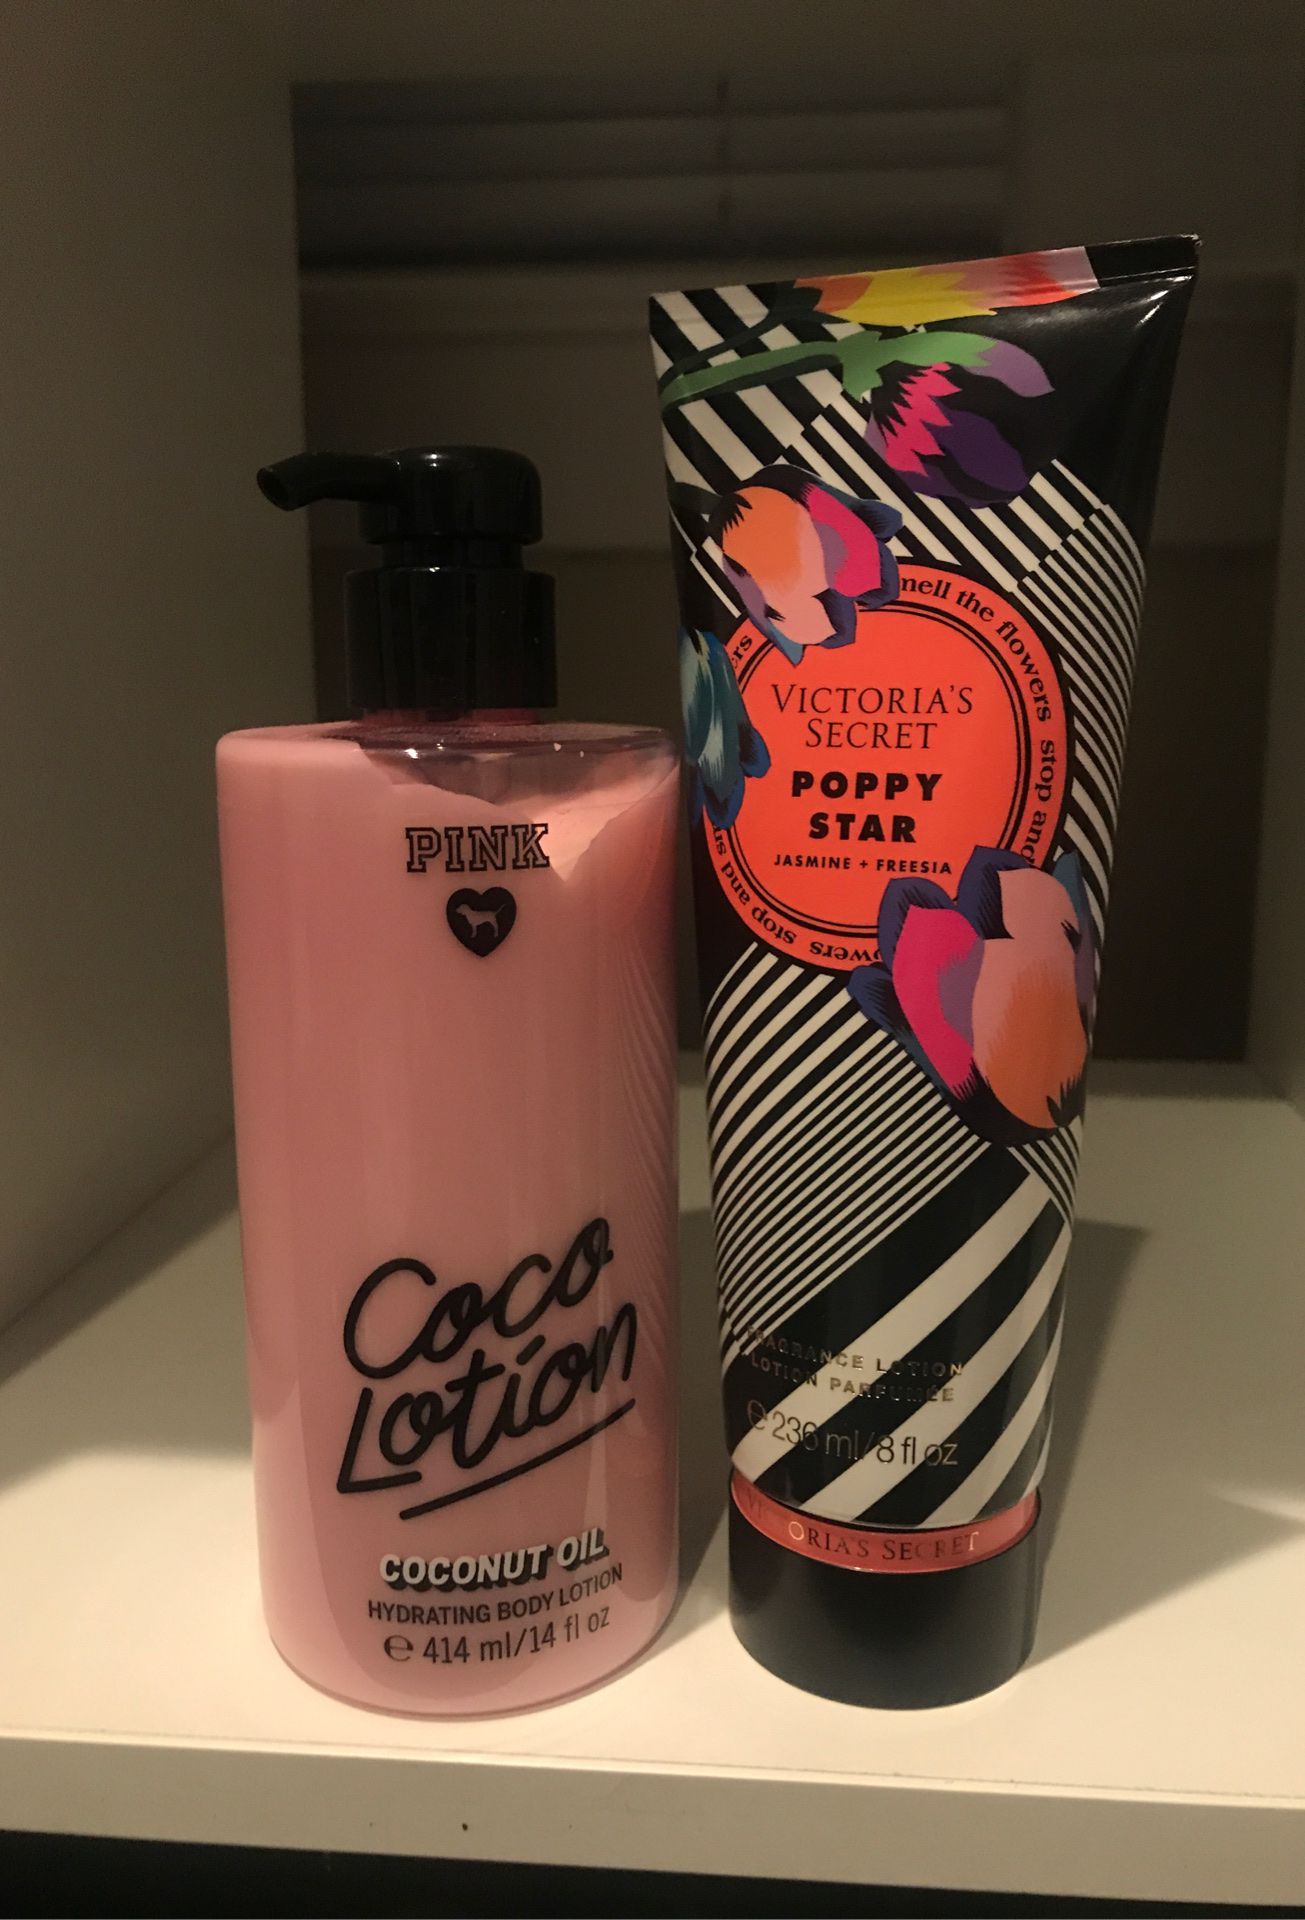 PINK and Victoria’s Secret body lotion